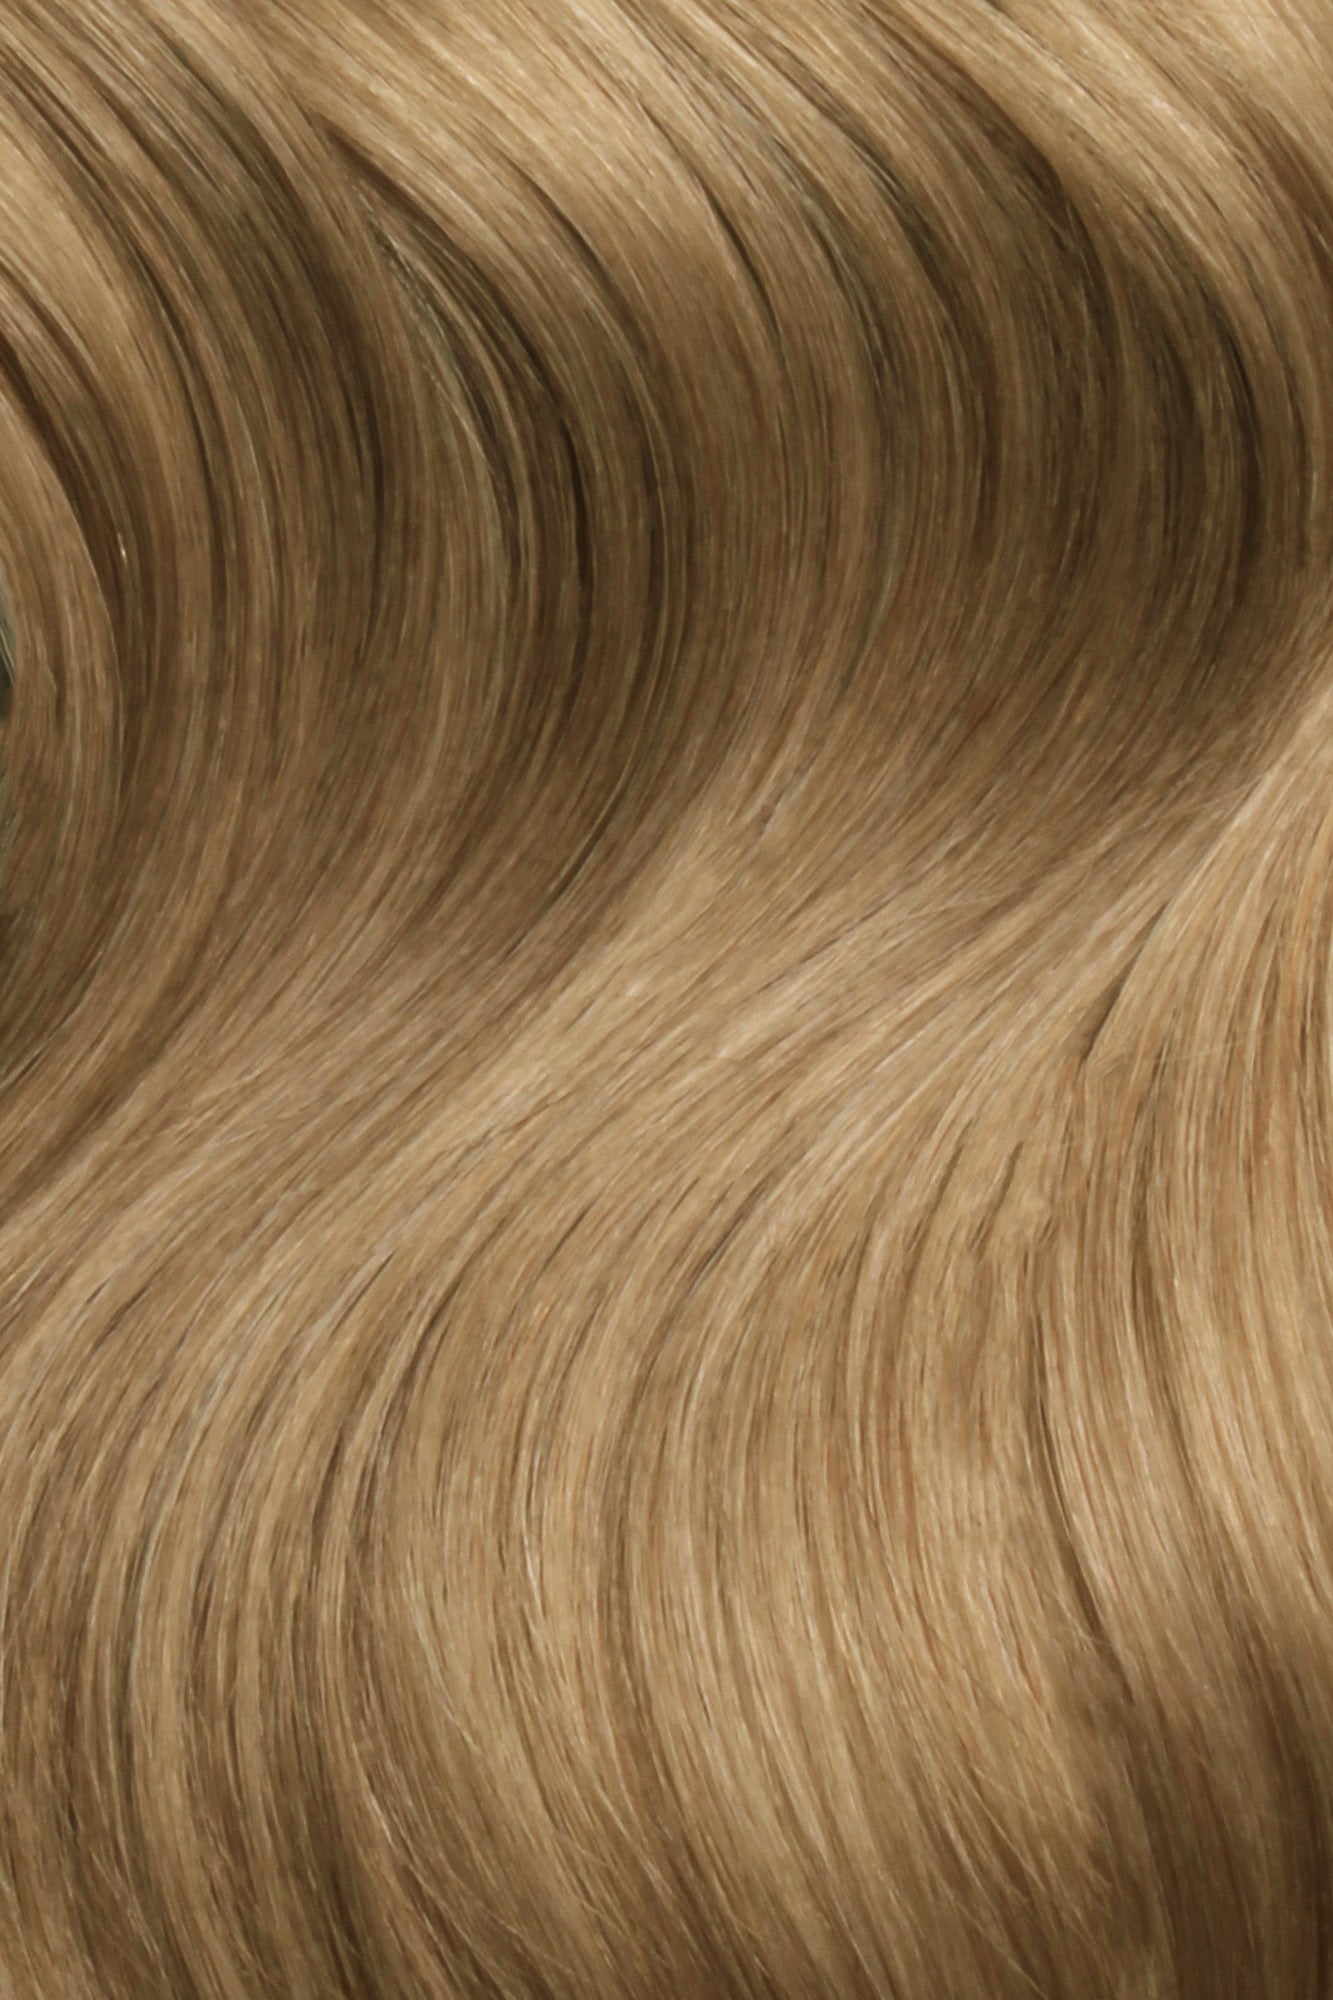 SEAMLESS® Flat Weft 22 Inches - SWAY Hair Extensions Champagne-Chestnut-8-22 Natural SEAMLESS® Flat Weft 22 Inches extensions. Thin, flexible, and discreet. 100% Double Drawn Remy Human Hair. Versatile and reusable